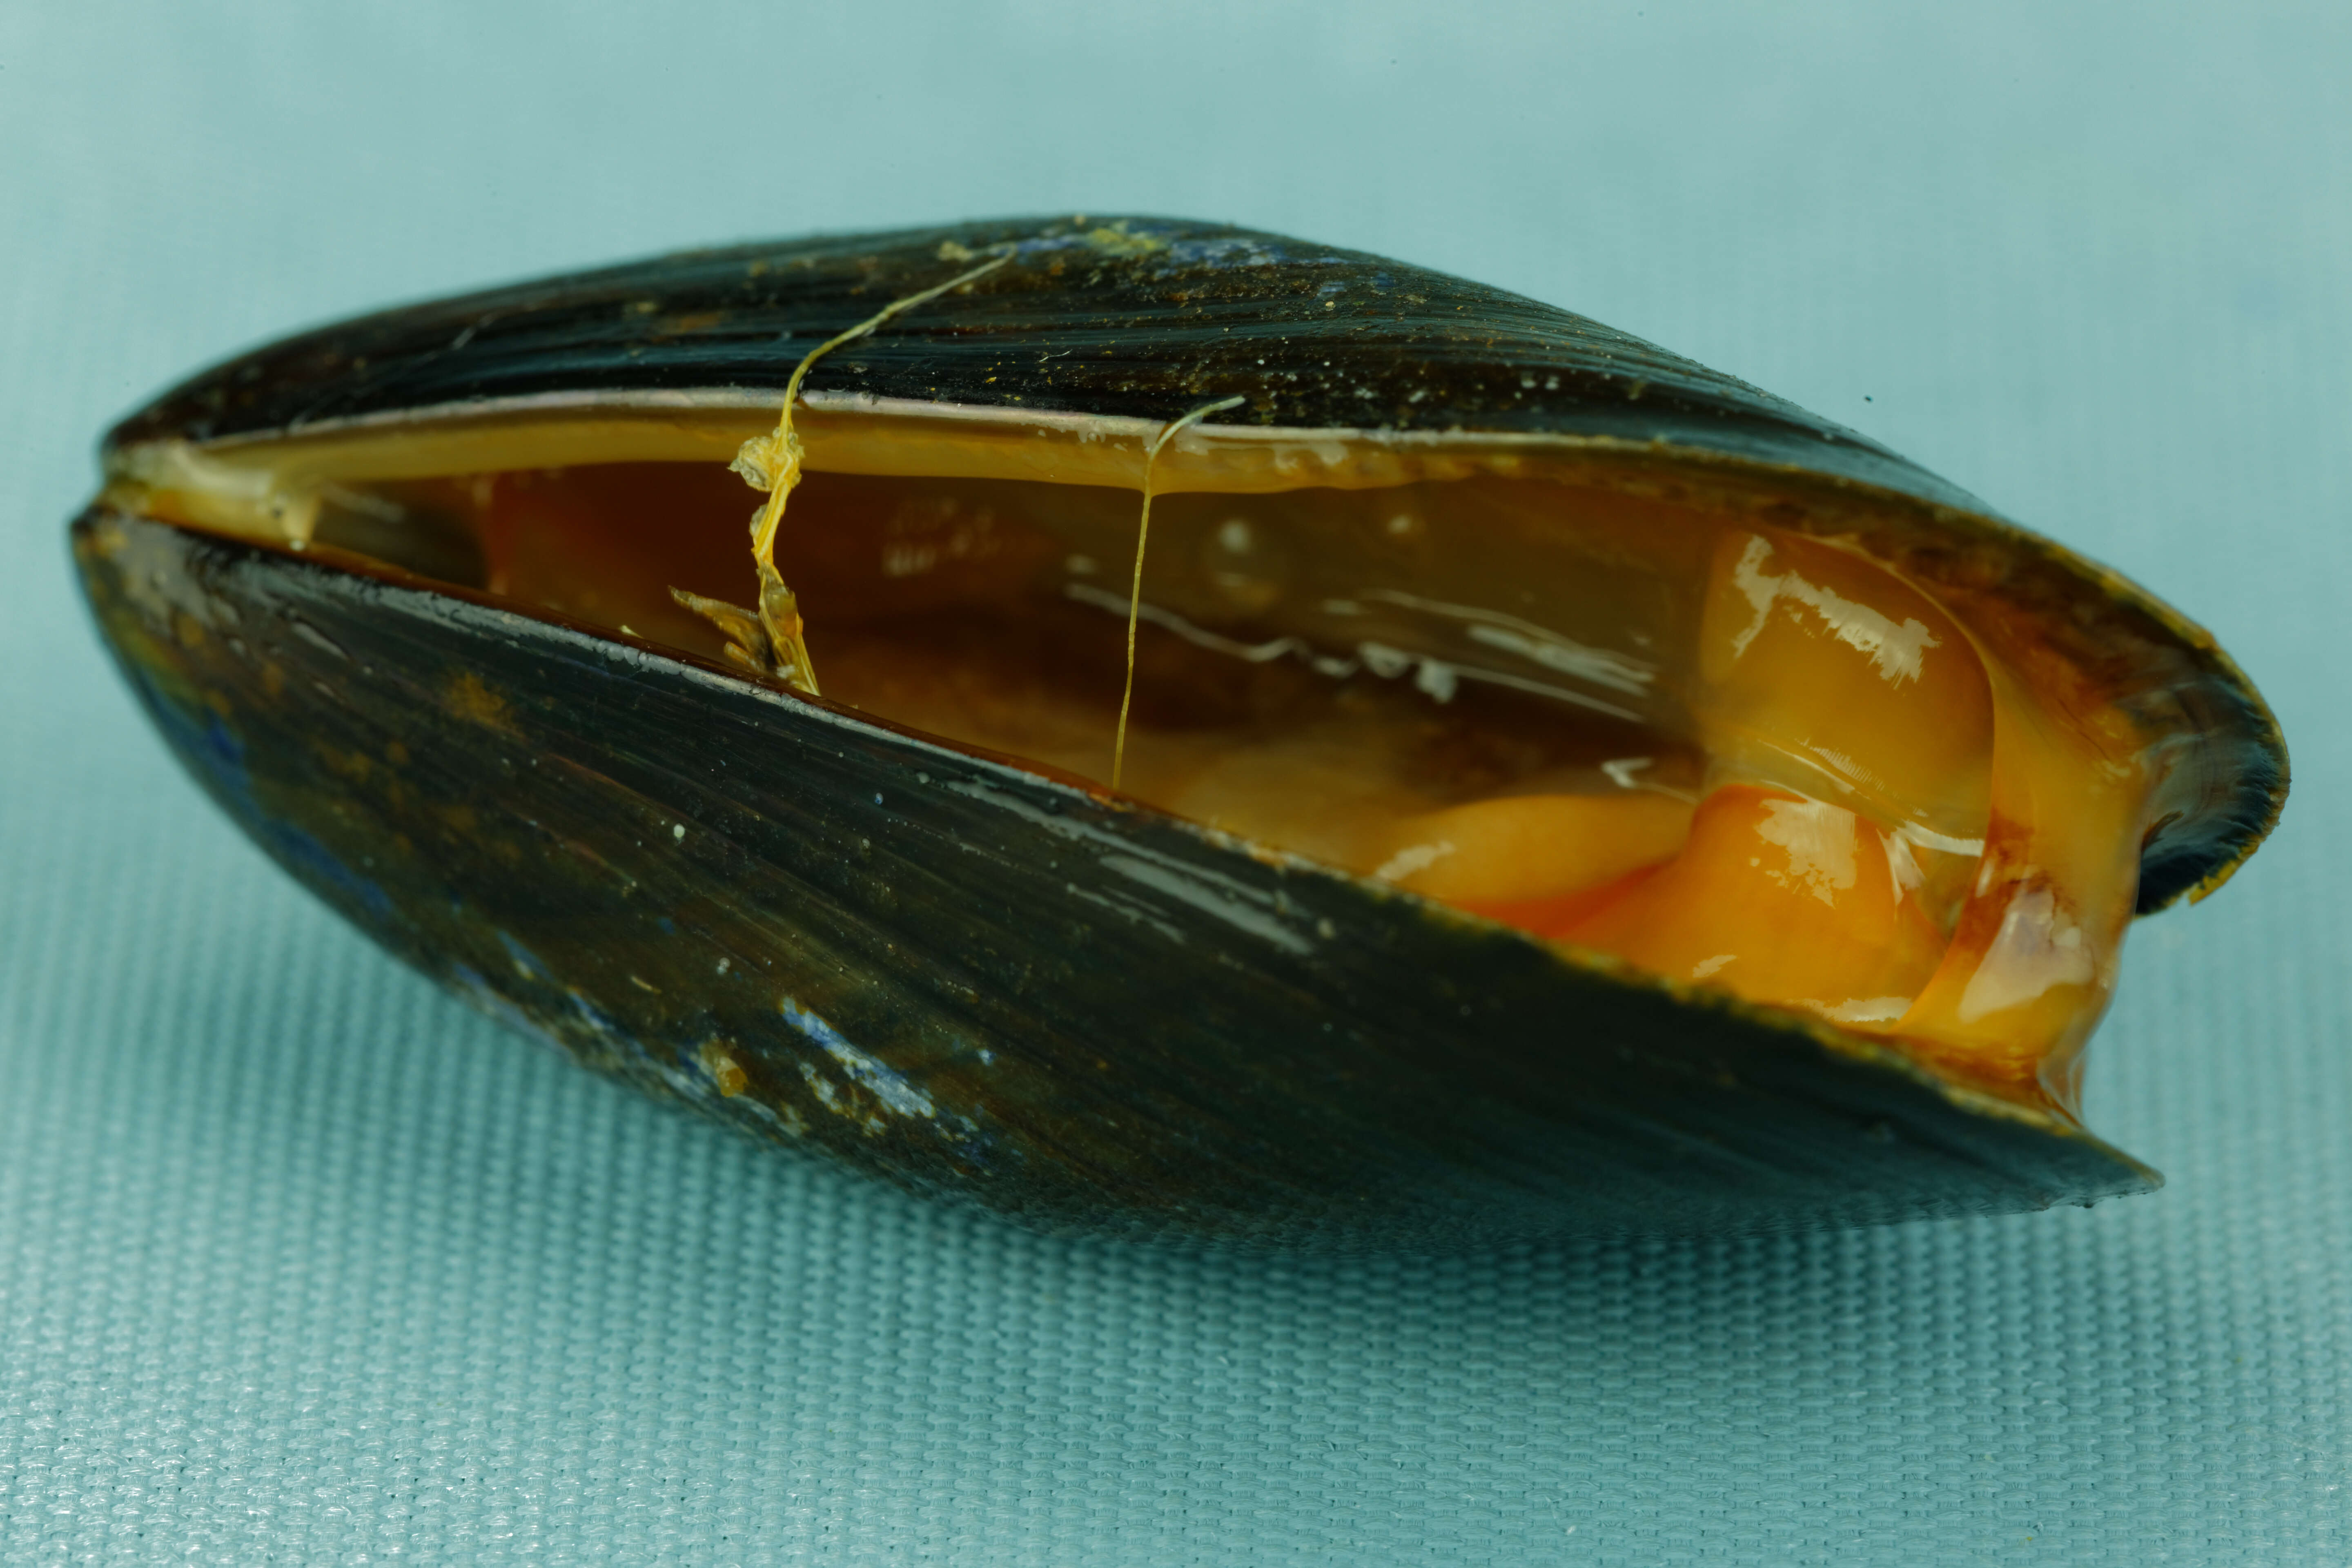 Image of Blue mussel